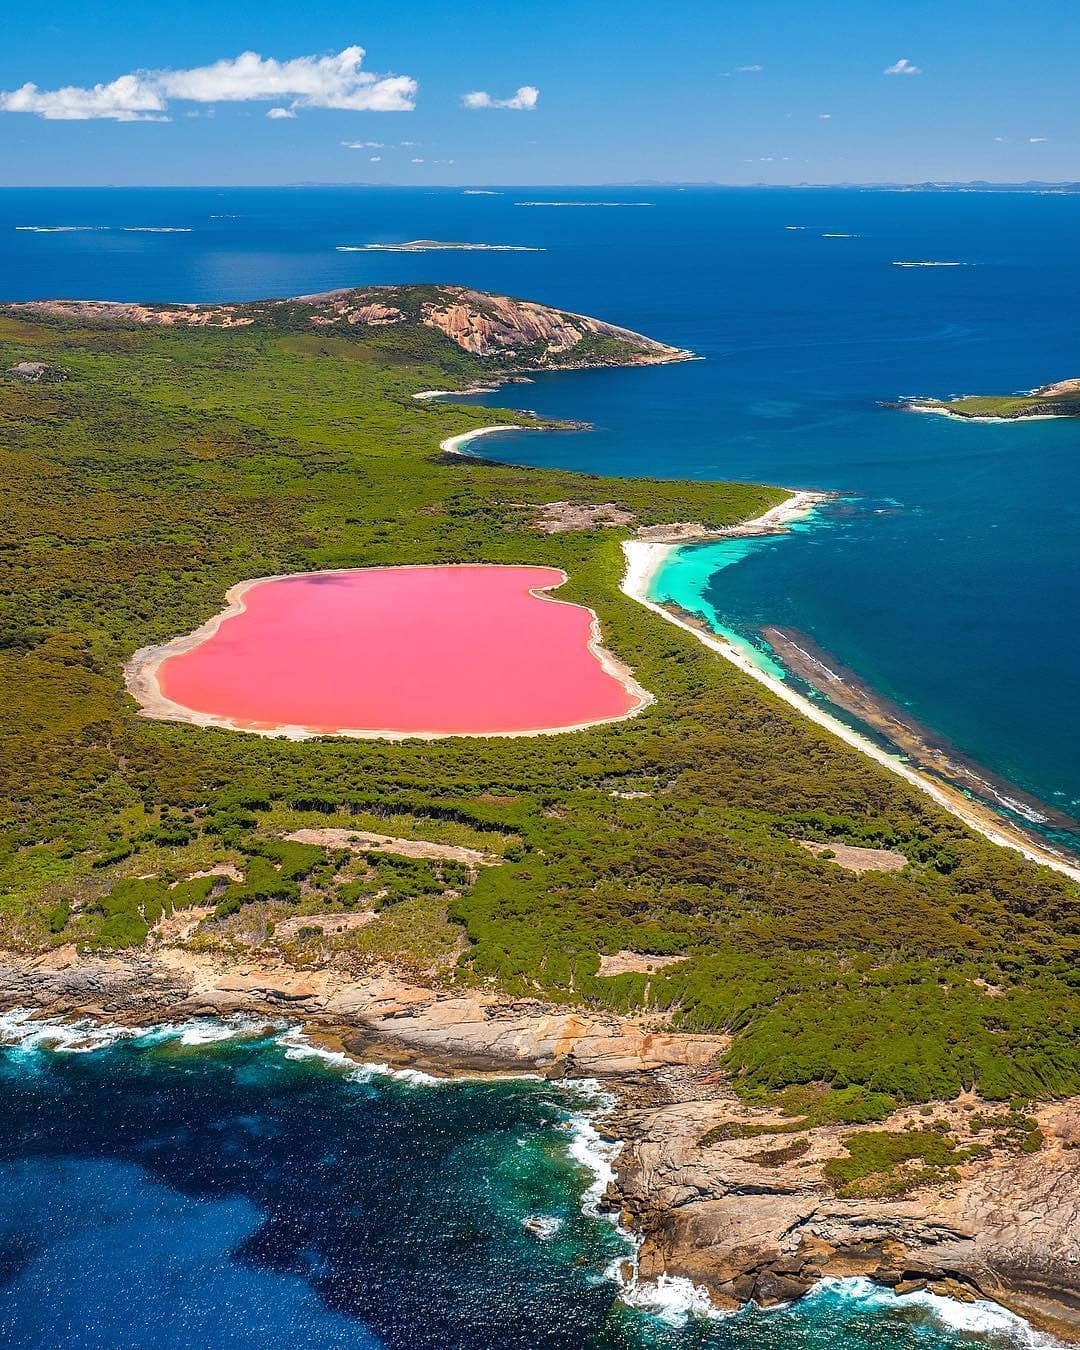 📌Shake the milk Down Undah📌
Reposted from @_markfitz -  Is this the world's biggest strawberry milkshake?! 💖💦🌴☀️😍
Lake Hillier is the name of this stunningly pink natural phenomenon on Middle Island in @australiasgoldenoutback! The ultimate way to see it is by air with @goldfields_airservices and the 1hr 40min flight takes in the epic views over the surrounding National Parks and Recherche Archipelago! ✈️😍
#australiasgoldenoutback @westernaustralia #justanotherdayinWA #seeaustralia
.
.
#esperance #lakehillier #goldenoutback #thisisWA #esperancechaletvillage #olympusinspired #perthlife #perthvibes #westernaustralia #perthisok #beautifuldestinations #beachesnresorts #exploringaustralia #seekinteresting #mylpguide #lonelyplanet #beautiful__travel #sandisk #openmyworld #traveltropicals #LiveIntrepid #creativelive #beboundless #thisistravel #tlpicks #markfitz